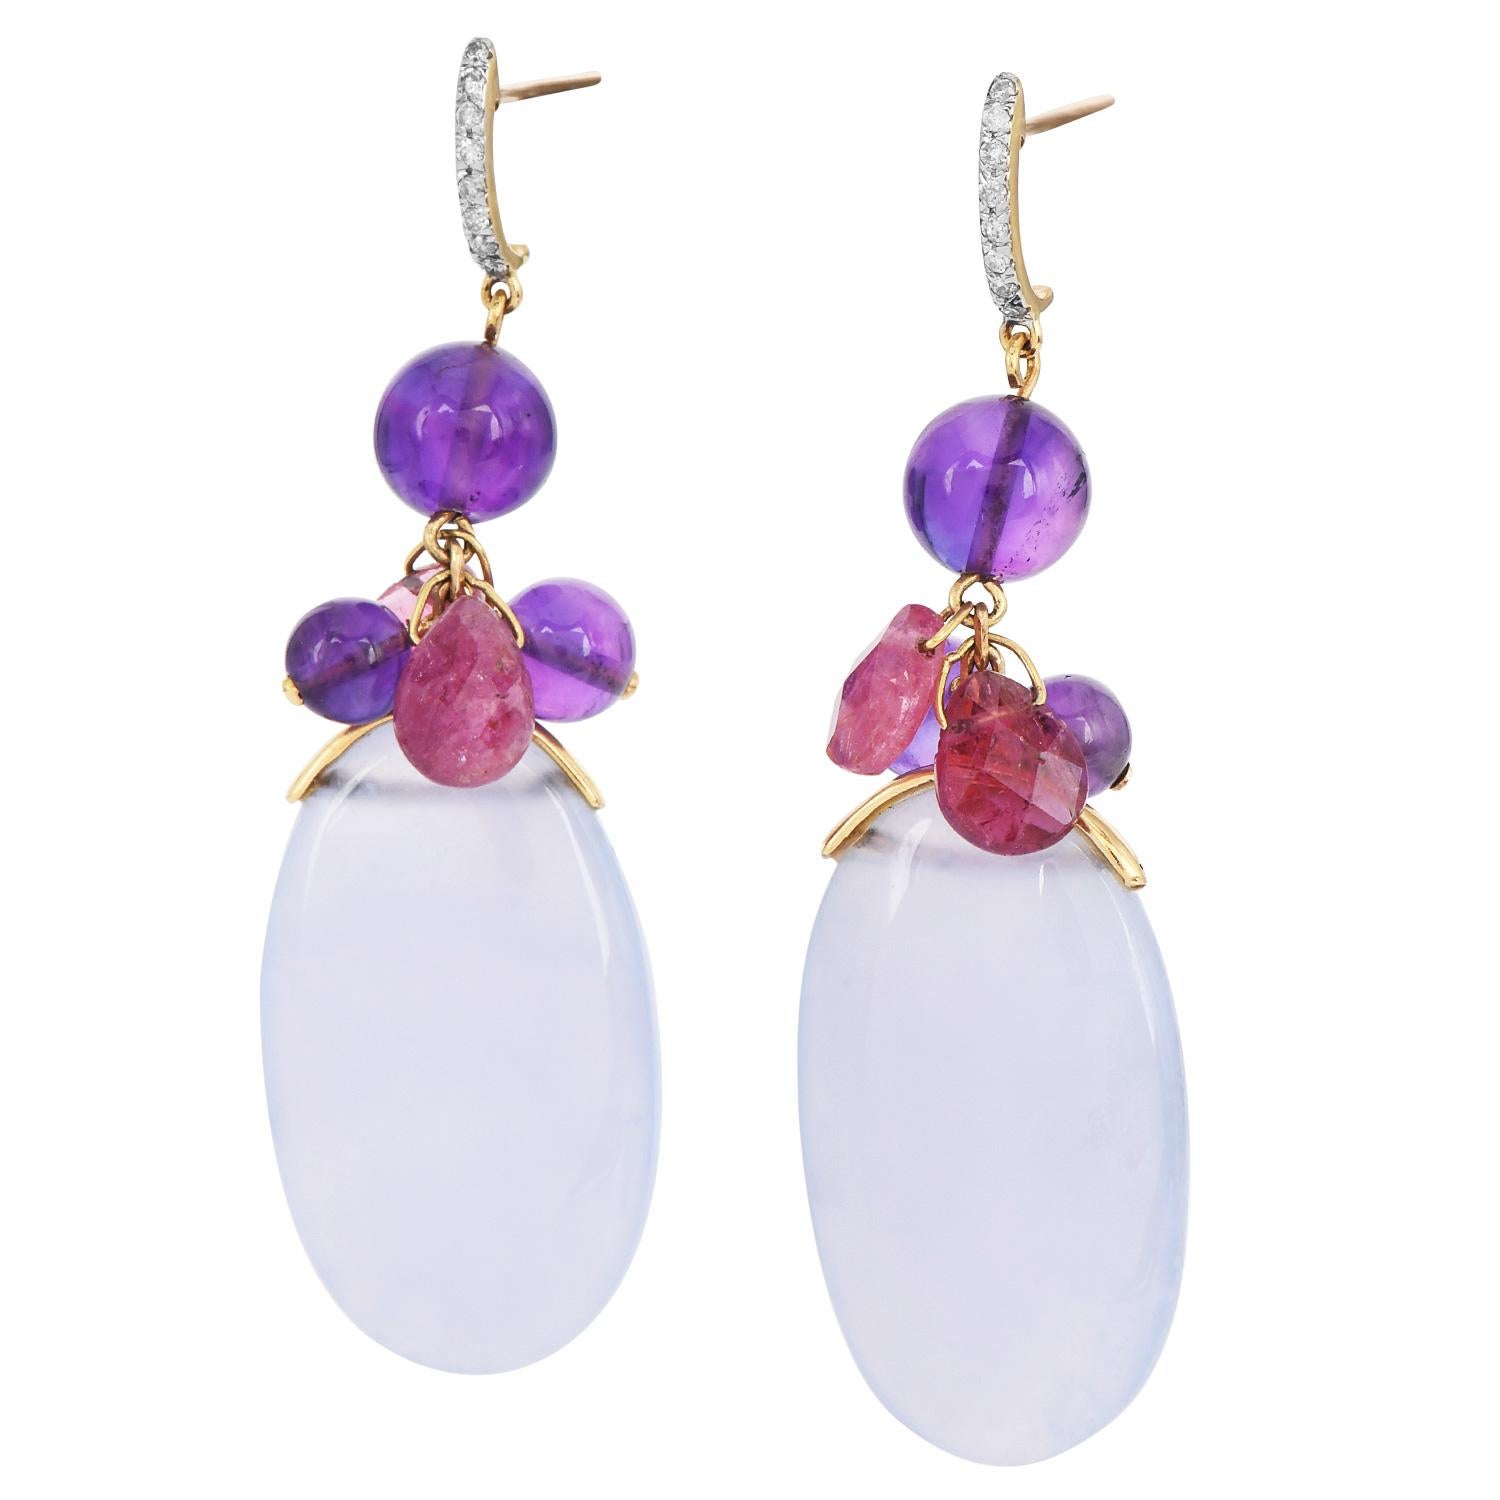 These funky Calcedony Gem, amethyst, turmaline and diamond dangle earrings are crafted in solid 18K yellow gold. Dangle earrings feature 6 amethyst beads approx. 10.00 carats each connected to Pear double sided carved turmalineand two large